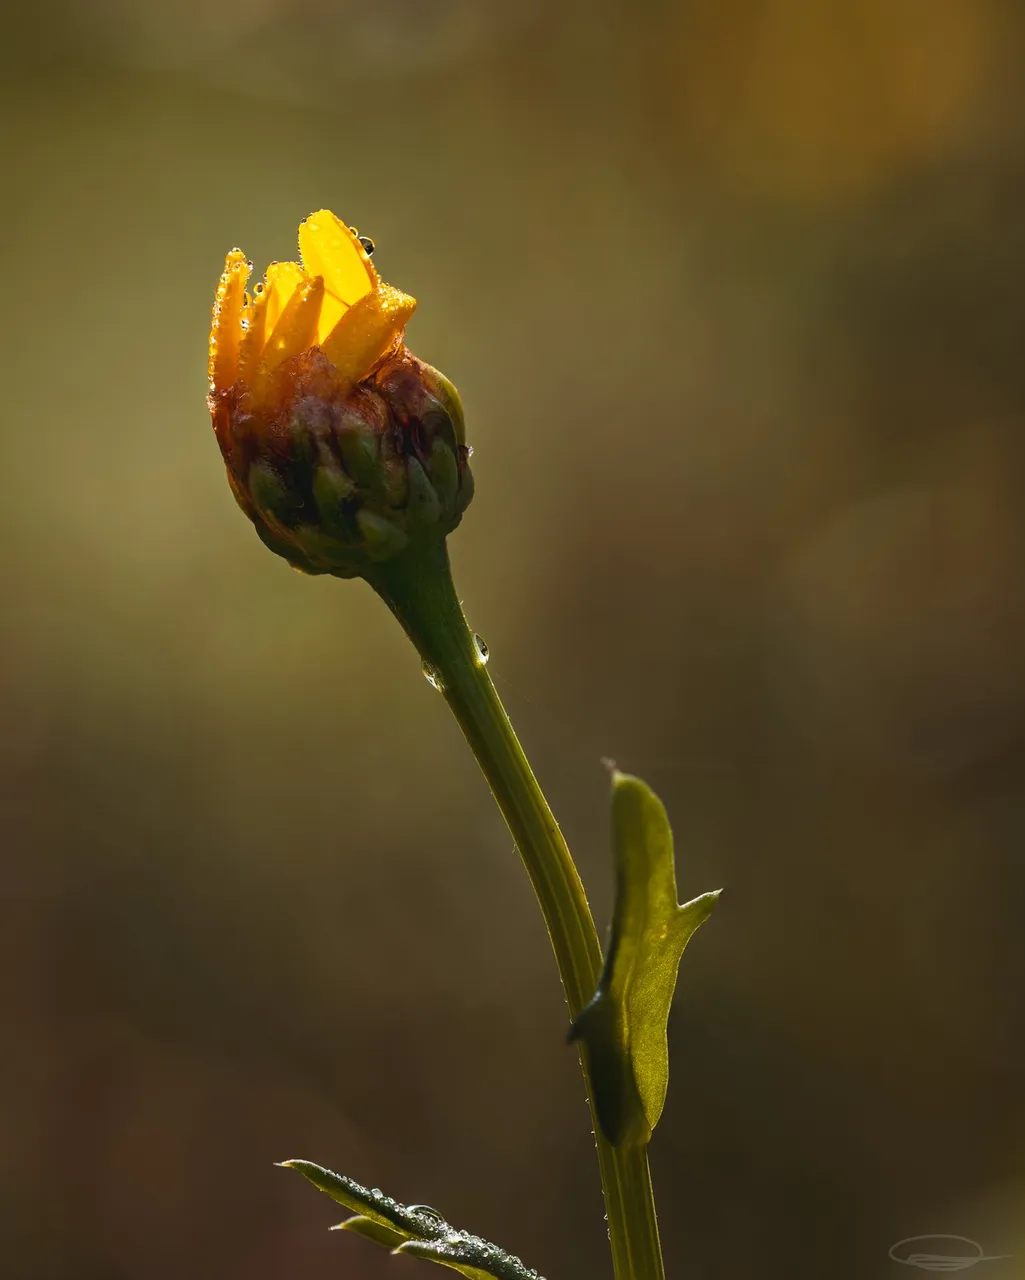 Closed Flower with Morning Dew